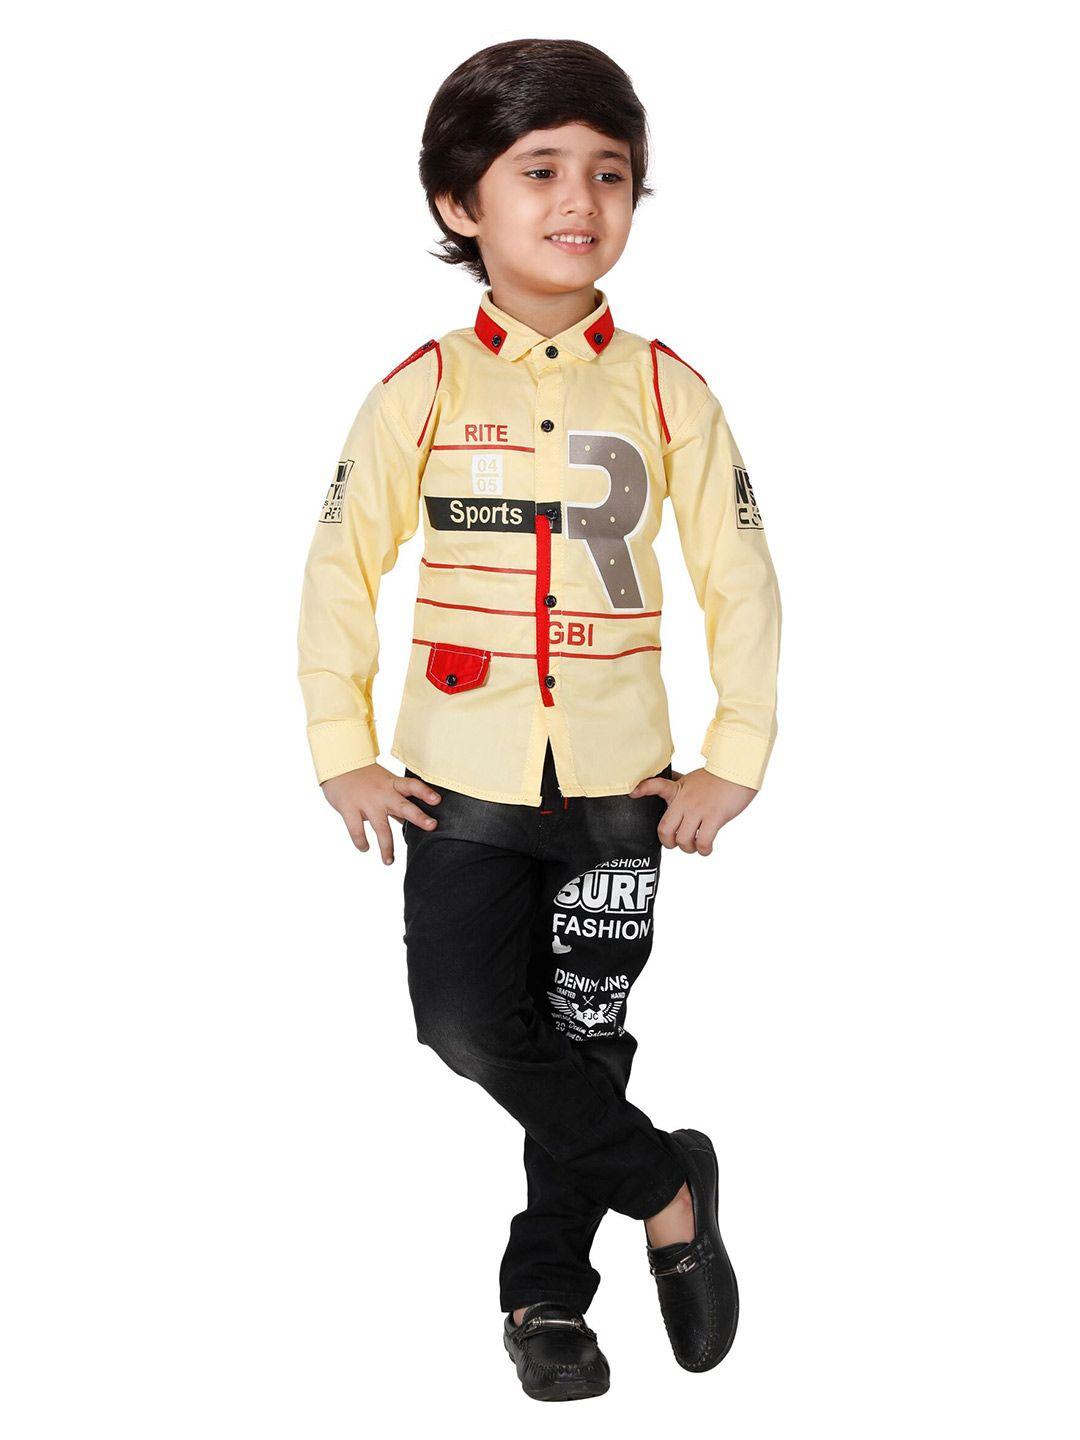 dkgf fashion boys yellow & black printed shirt with jeans